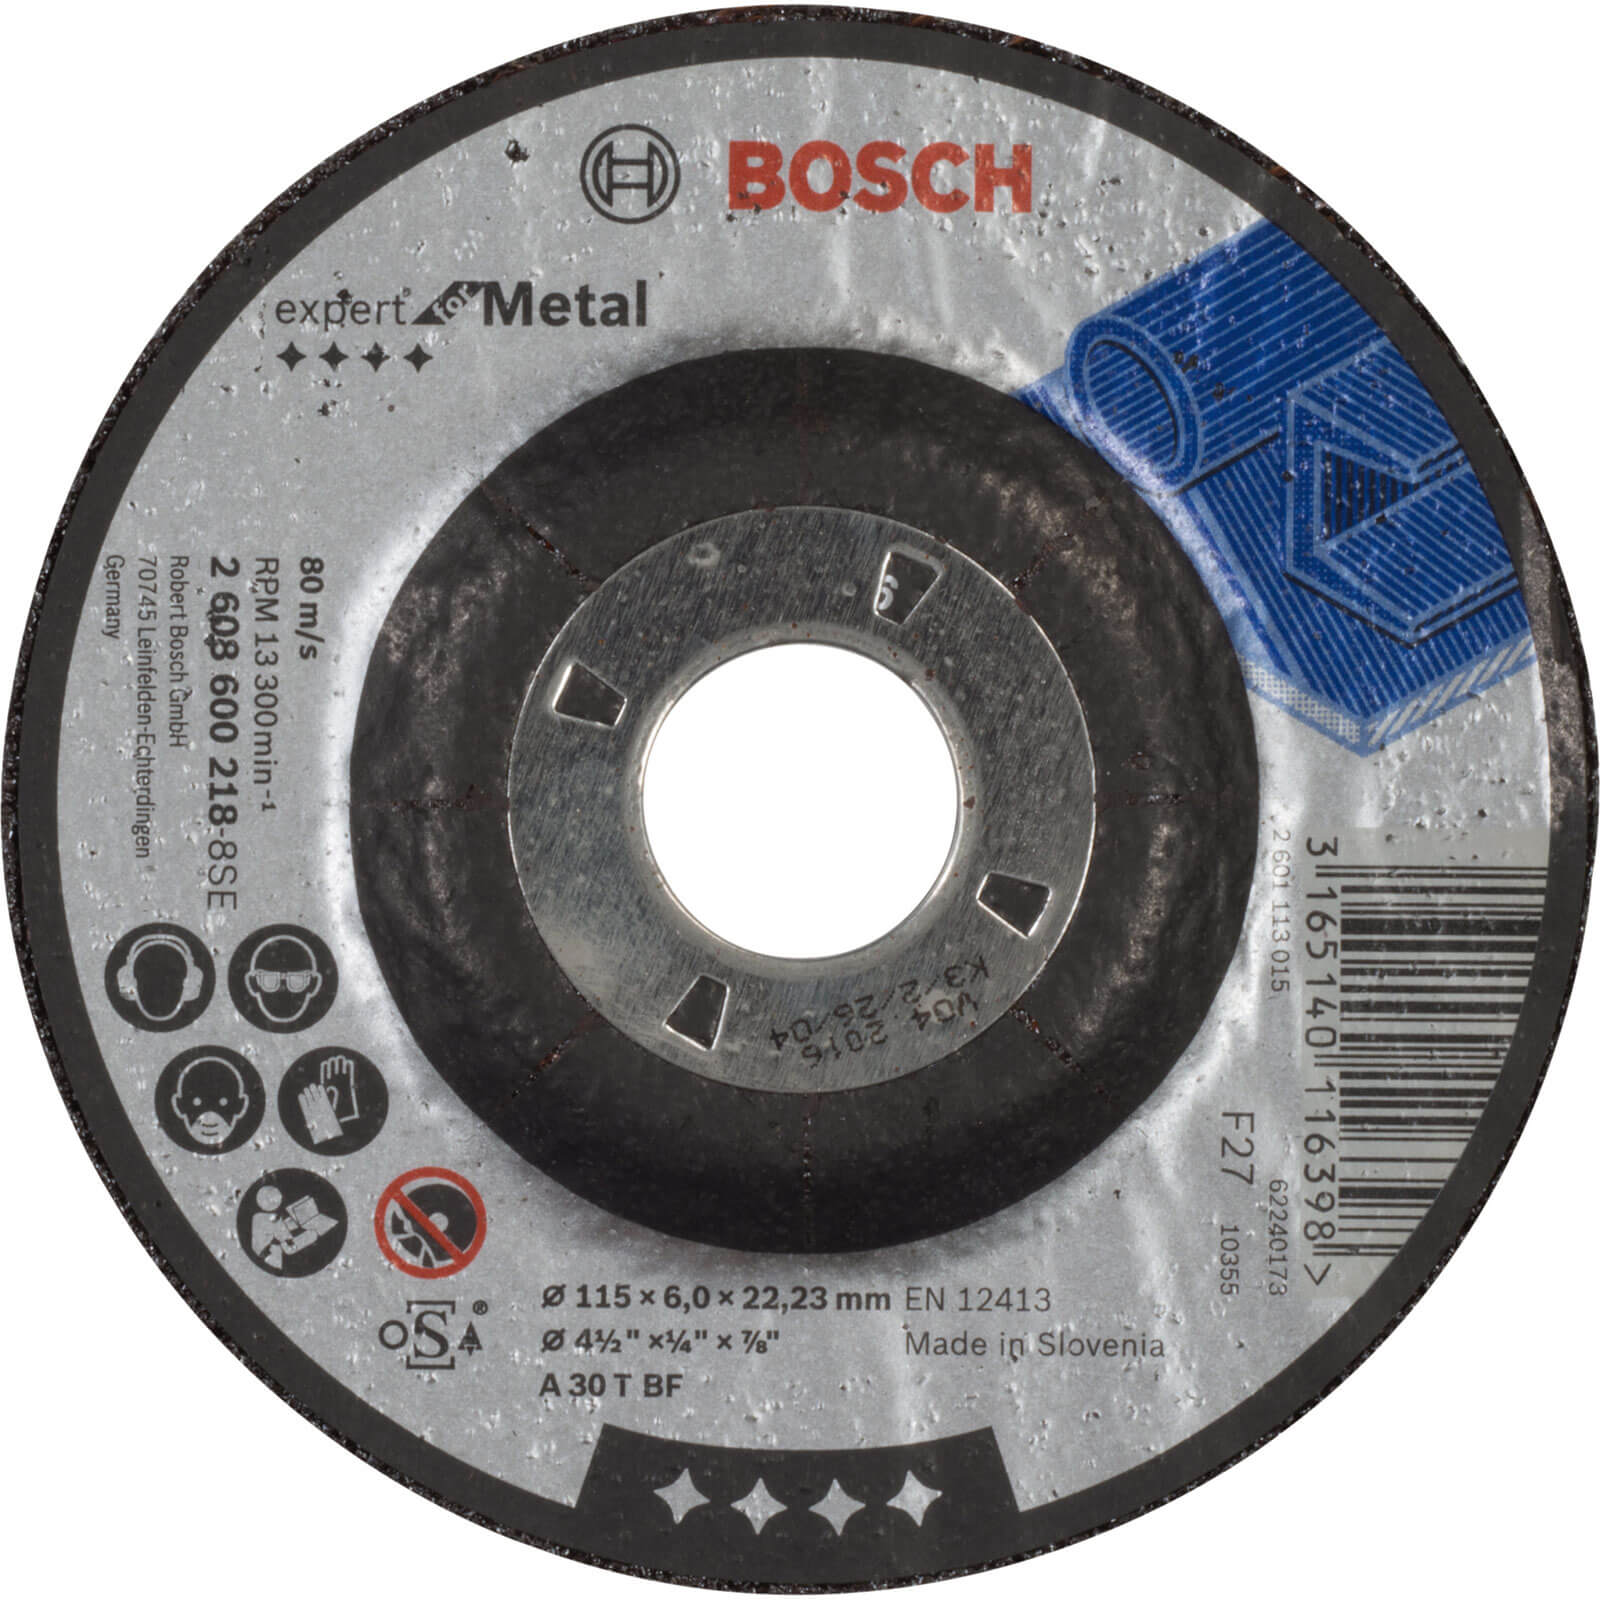 Image of Bosch A30T BF Drepressed Centre Metal Grinding Disc 115mm